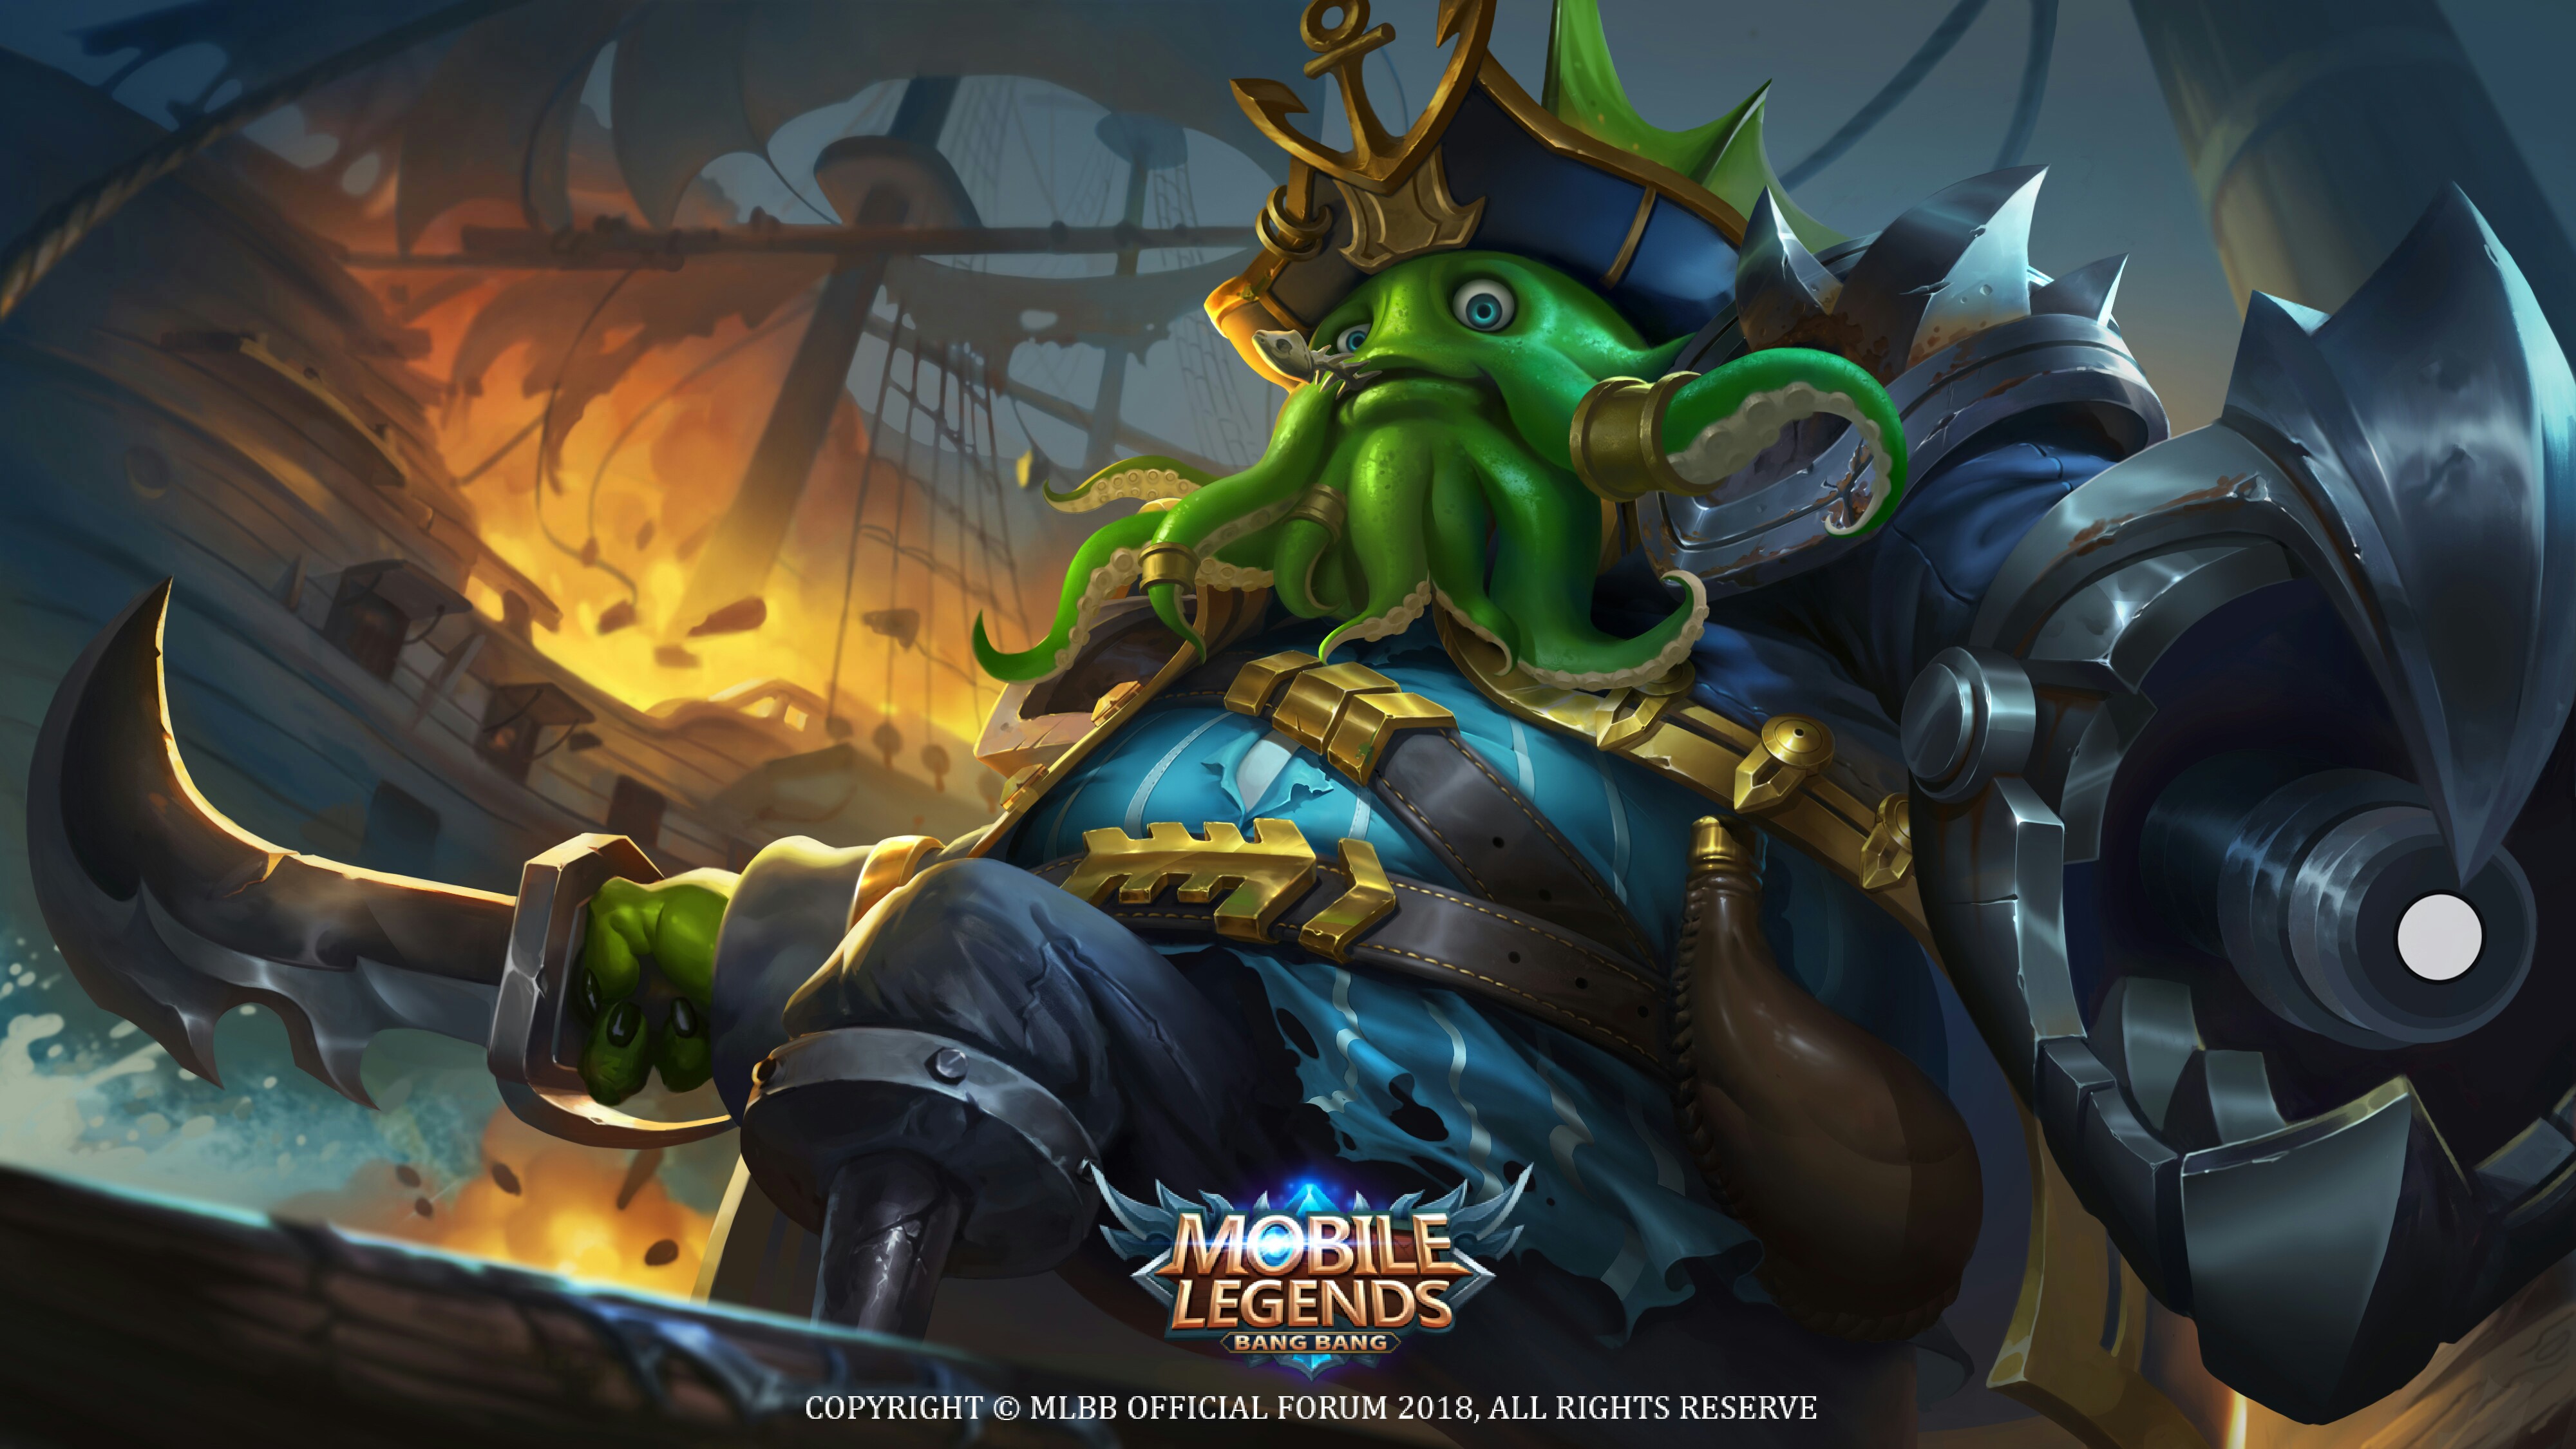 mobile legend wallpaper,action adventure game,pc game,cg artwork,games,fictional character